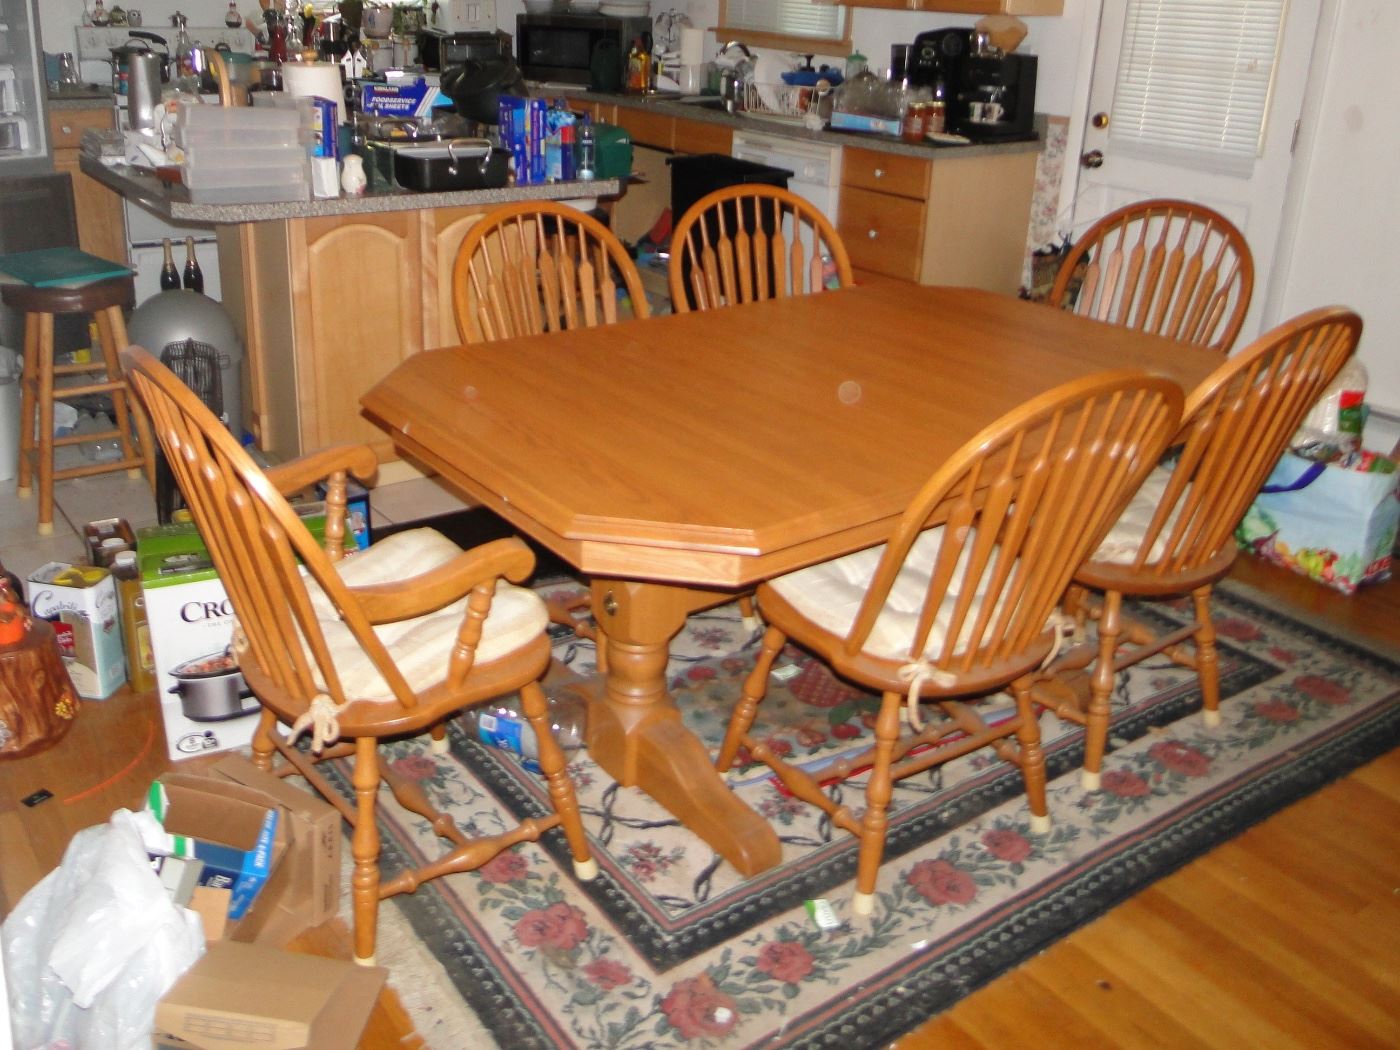 Oak Dining Room Table with 6 Chairs